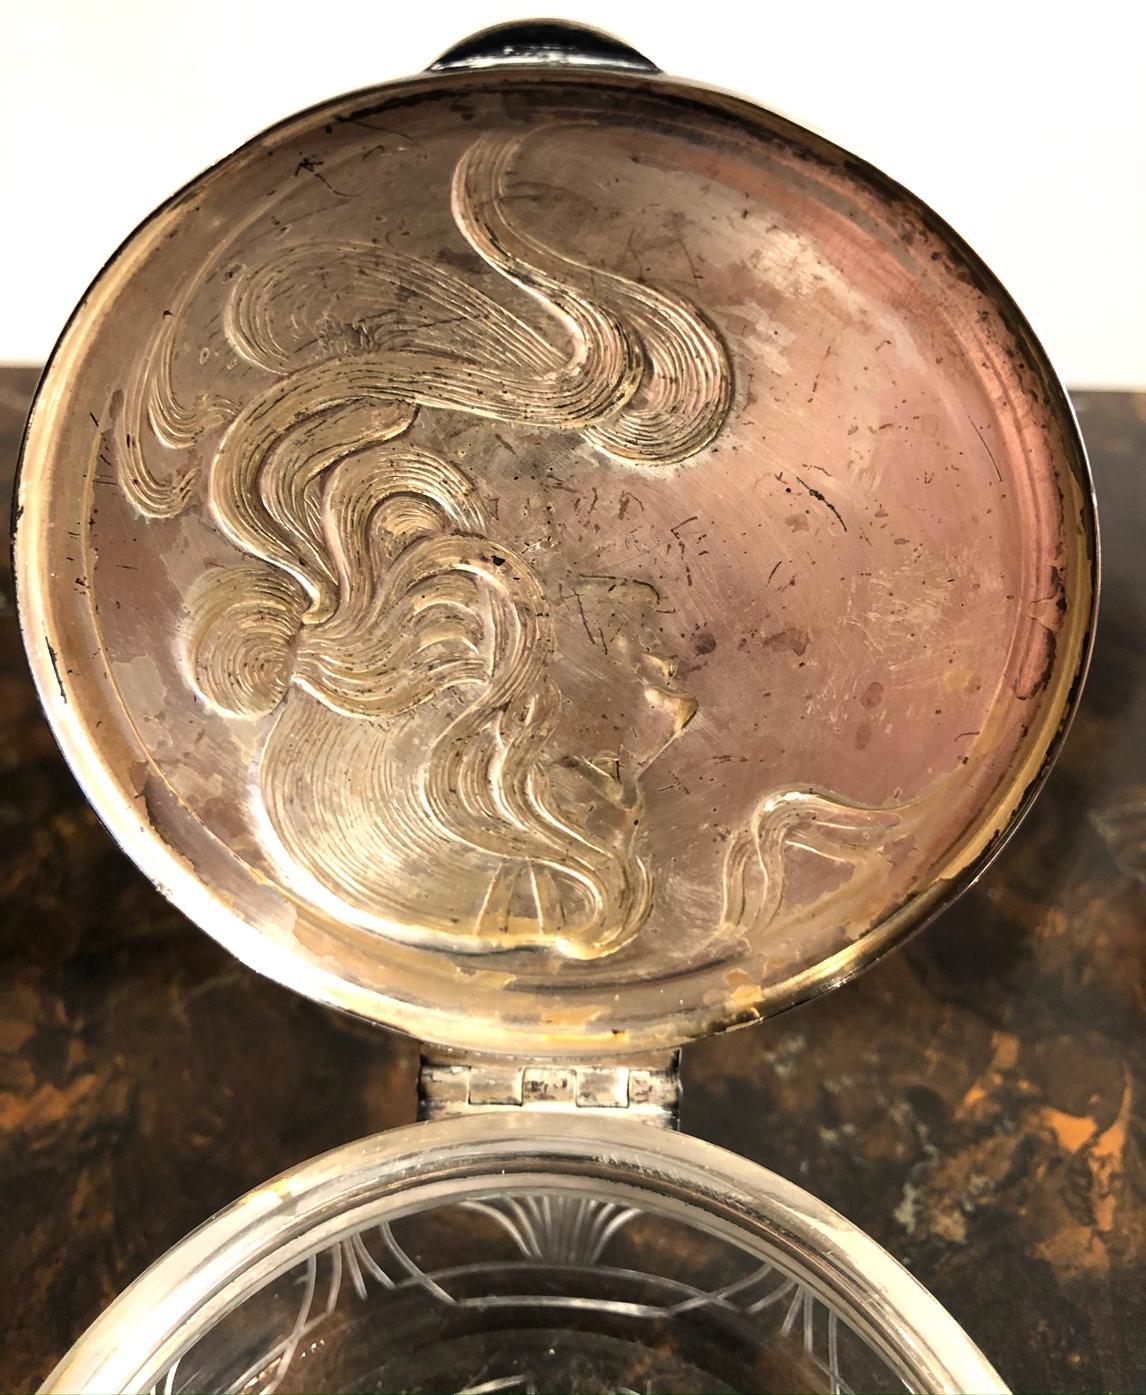 Powder jar. Glass and metal. No markings. Features a decorative profile of a woman. The jar is pressed glass. Nicely made.